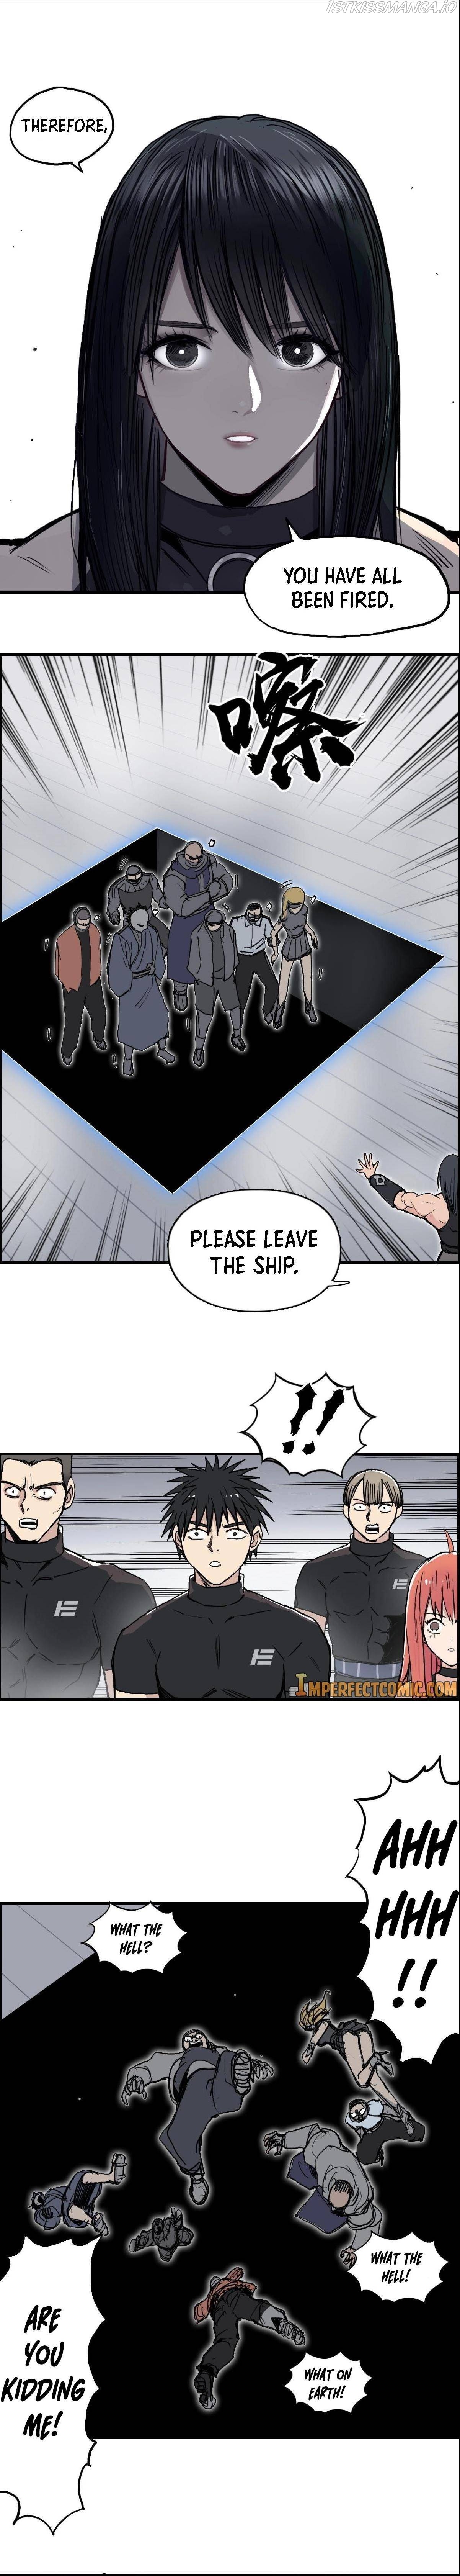 Super Cube Chapter 238 - Page 4